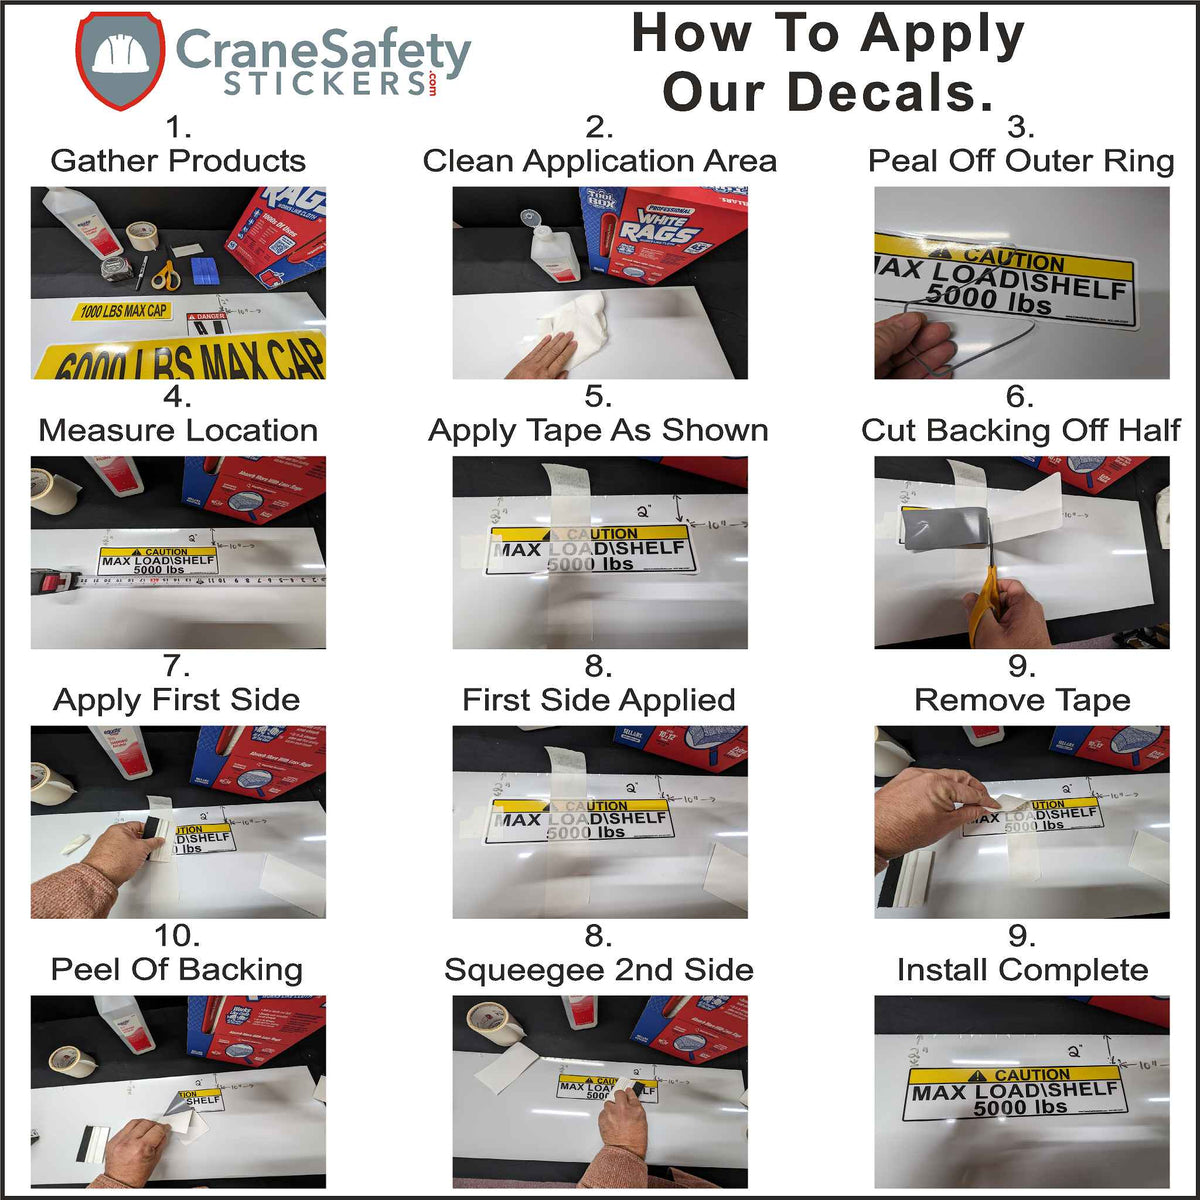 Directions On How to Apply Our OSHA Outrigger Safety Sticker Stand Clear While Outriggers Are Being Extended or Retracted.